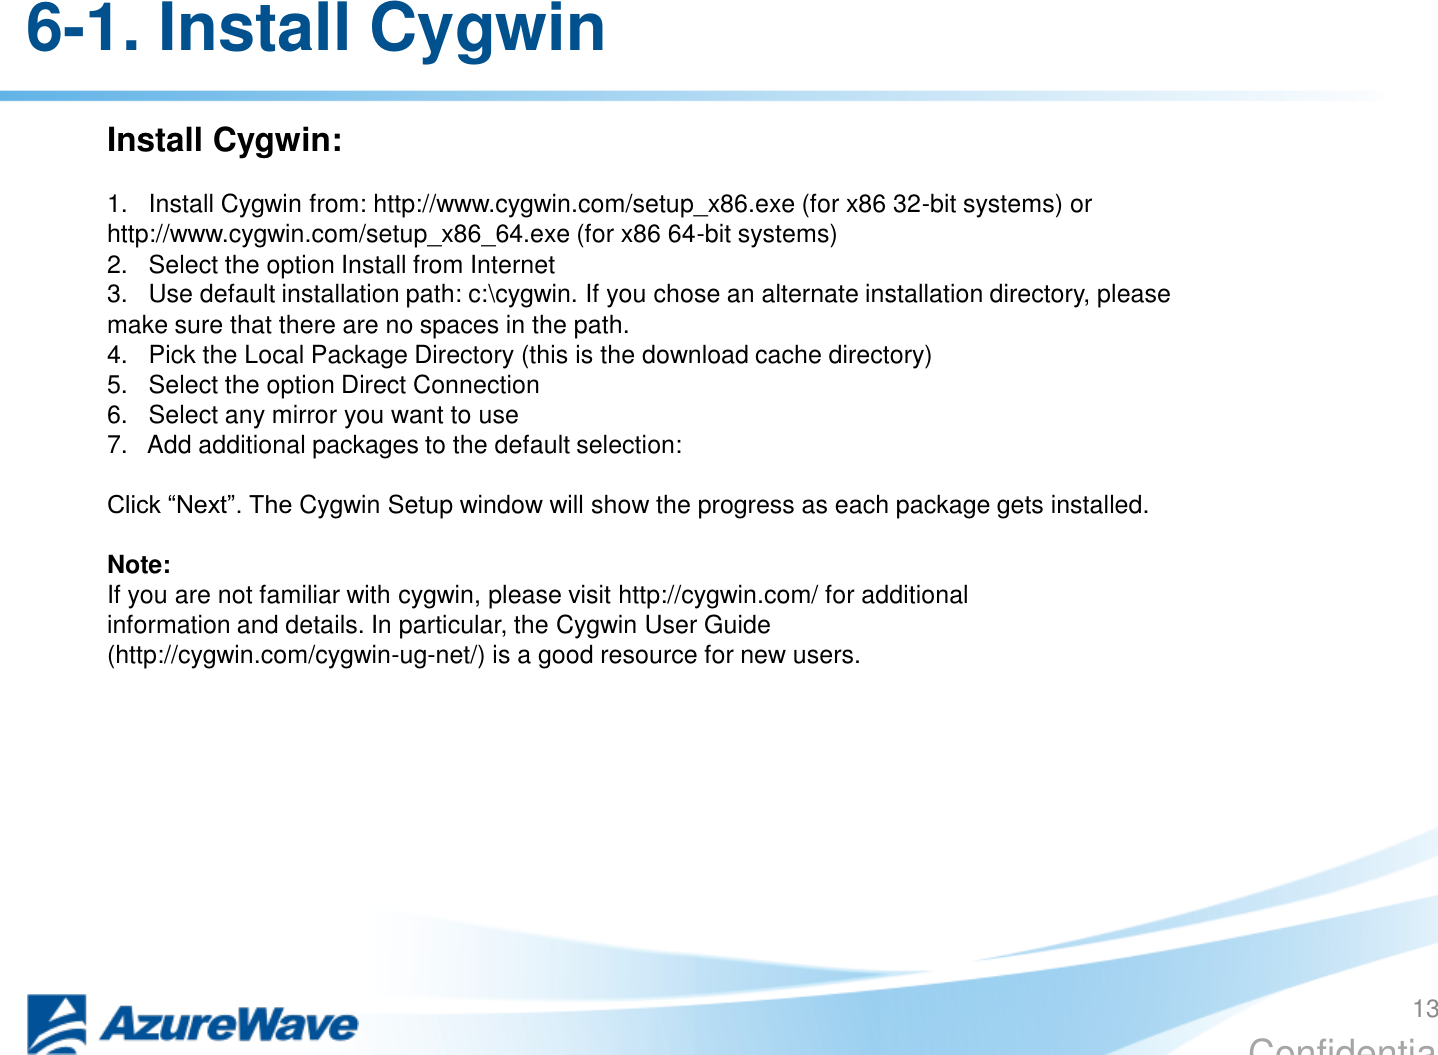 Confidential 6-1. Install Cygwin Install Cygwin:  1.   Install Cygwin from: http://www.cygwin.com/setup_x86.exe (for x86 32-bit systems) or http://www.cygwin.com/setup_x86_64.exe (for x86 64-bit systems) 2.   Select the option Install from Internet 3.   Use default installation path: c:\cygwin. If you chose an alternate installation directory, please make sure that there are no spaces in the path. 4.   Pick the Local Package Directory (this is the download cache directory) 5.   Select the option Direct Connection 6.   Select any mirror you want to use 7.   Add additional packages to the default selection:  Click “Next”. The Cygwin Setup window will show the progress as each package gets installed.  Note: If you are not familiar with cygwin, please visit http://cygwin.com/ for additional information and details. In particular, the Cygwin User Guide (http://cygwin.com/cygwin-ug-net/) is a good resource for new users.  13 